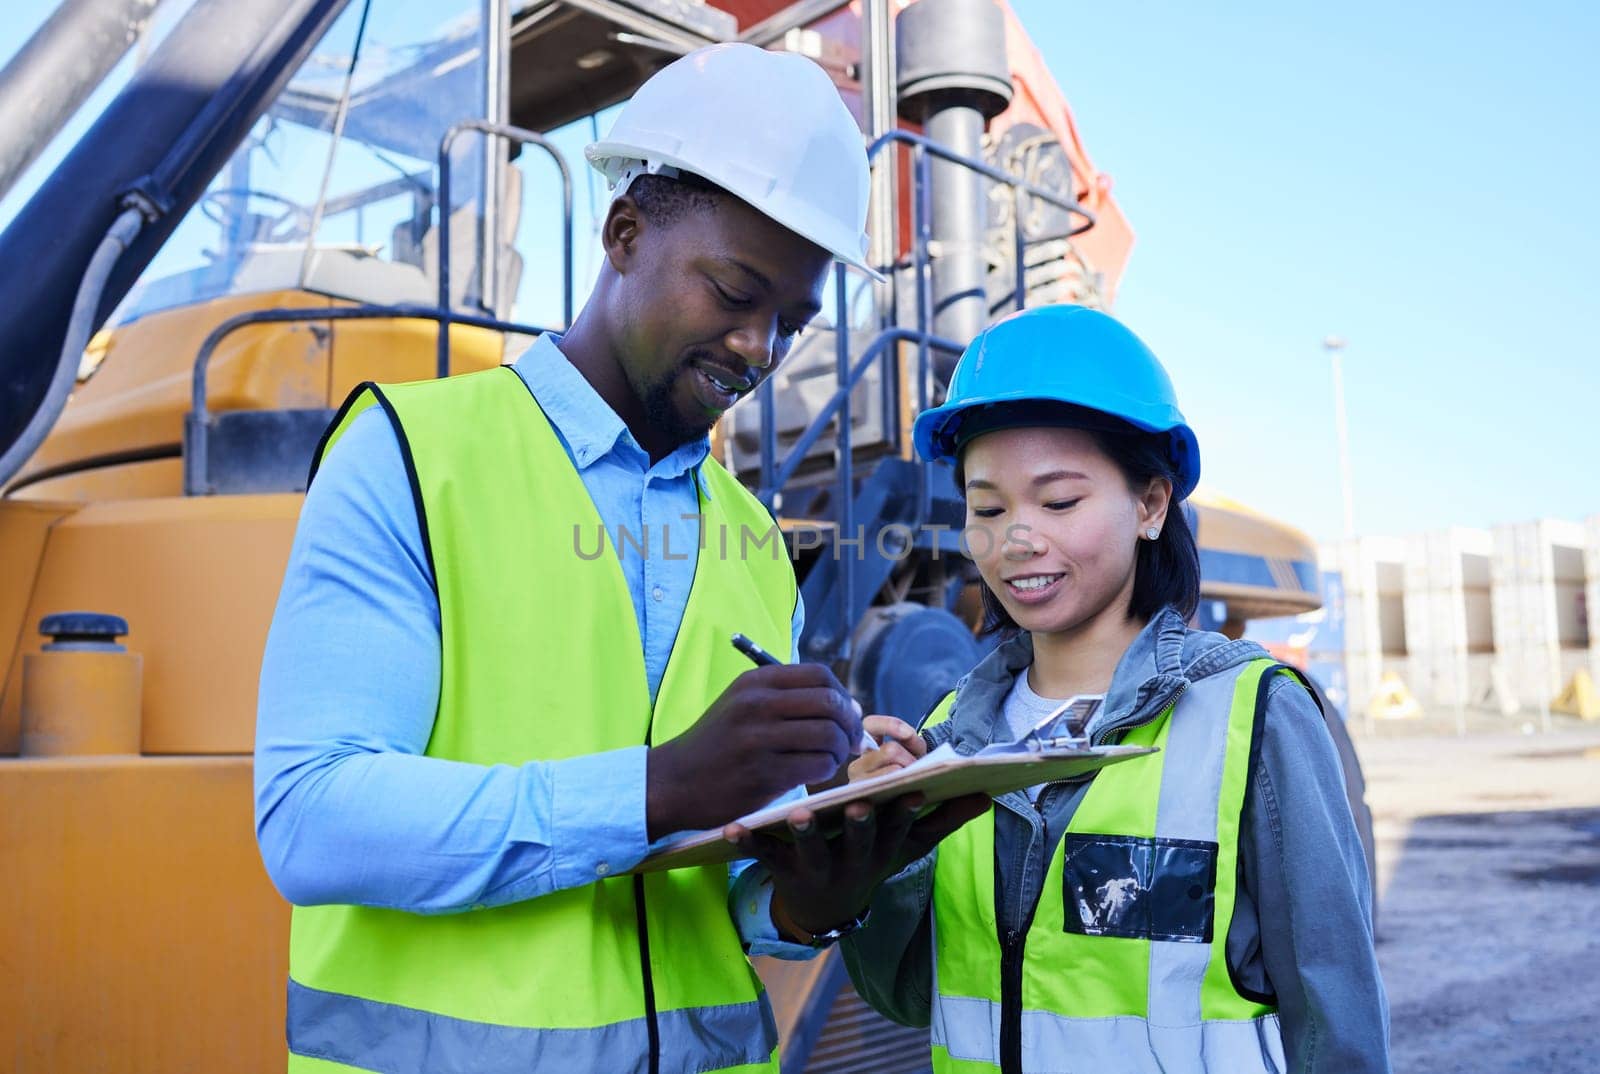 Logistics checklist, transportation and engineer people inspection of truck for supply chain management, cargo or export teamwork. Diversity, contract construction worker industrial site job planning.